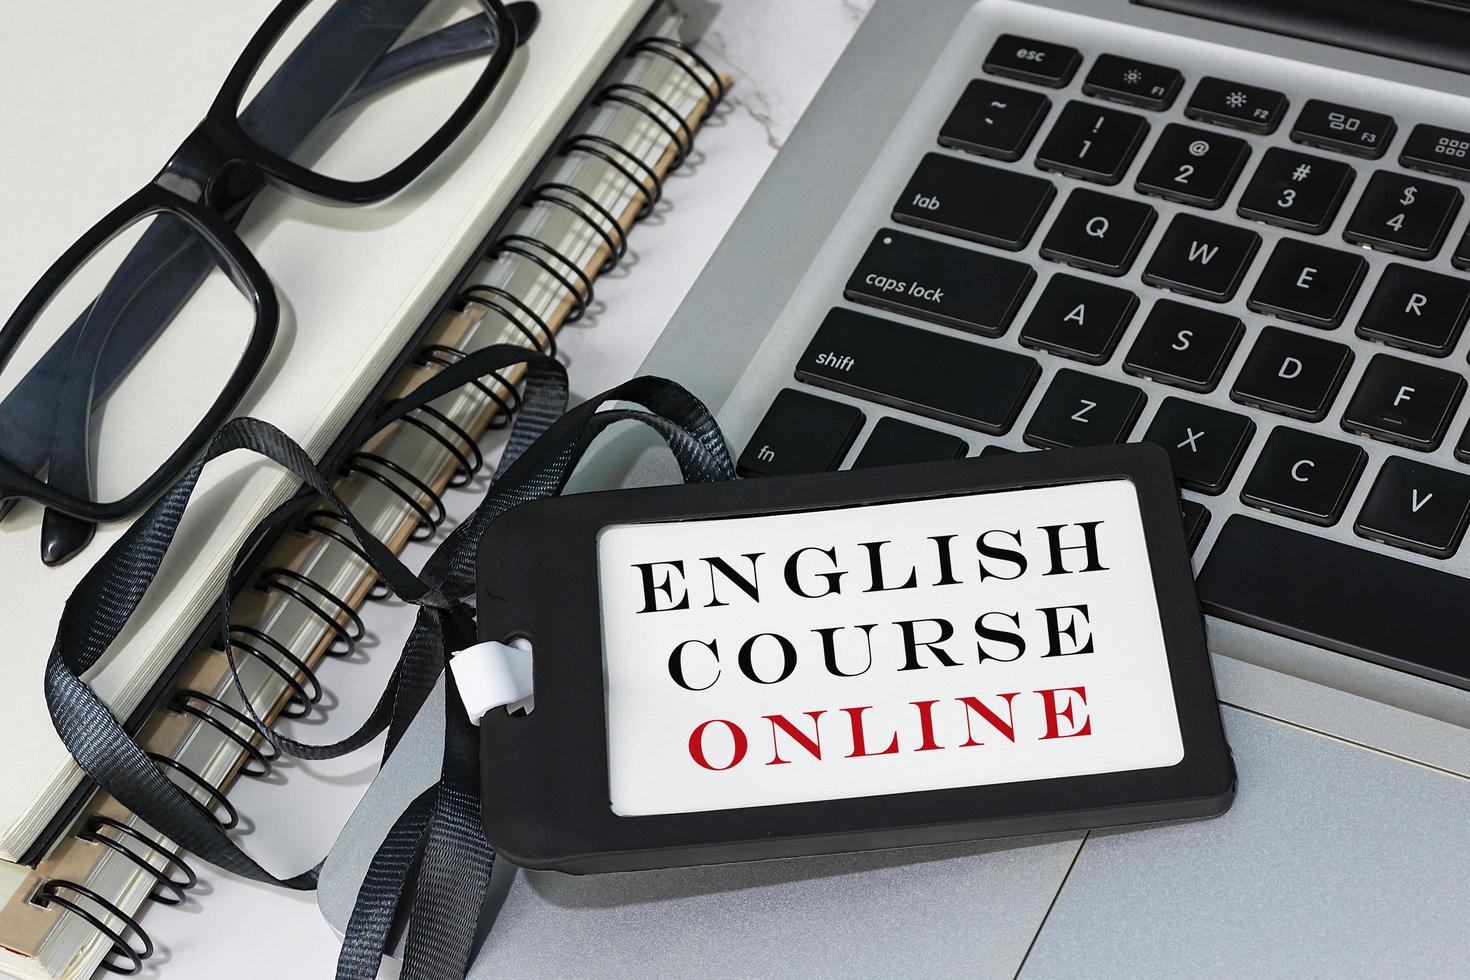 English course online text written on black name tag placed on a laptop. photo